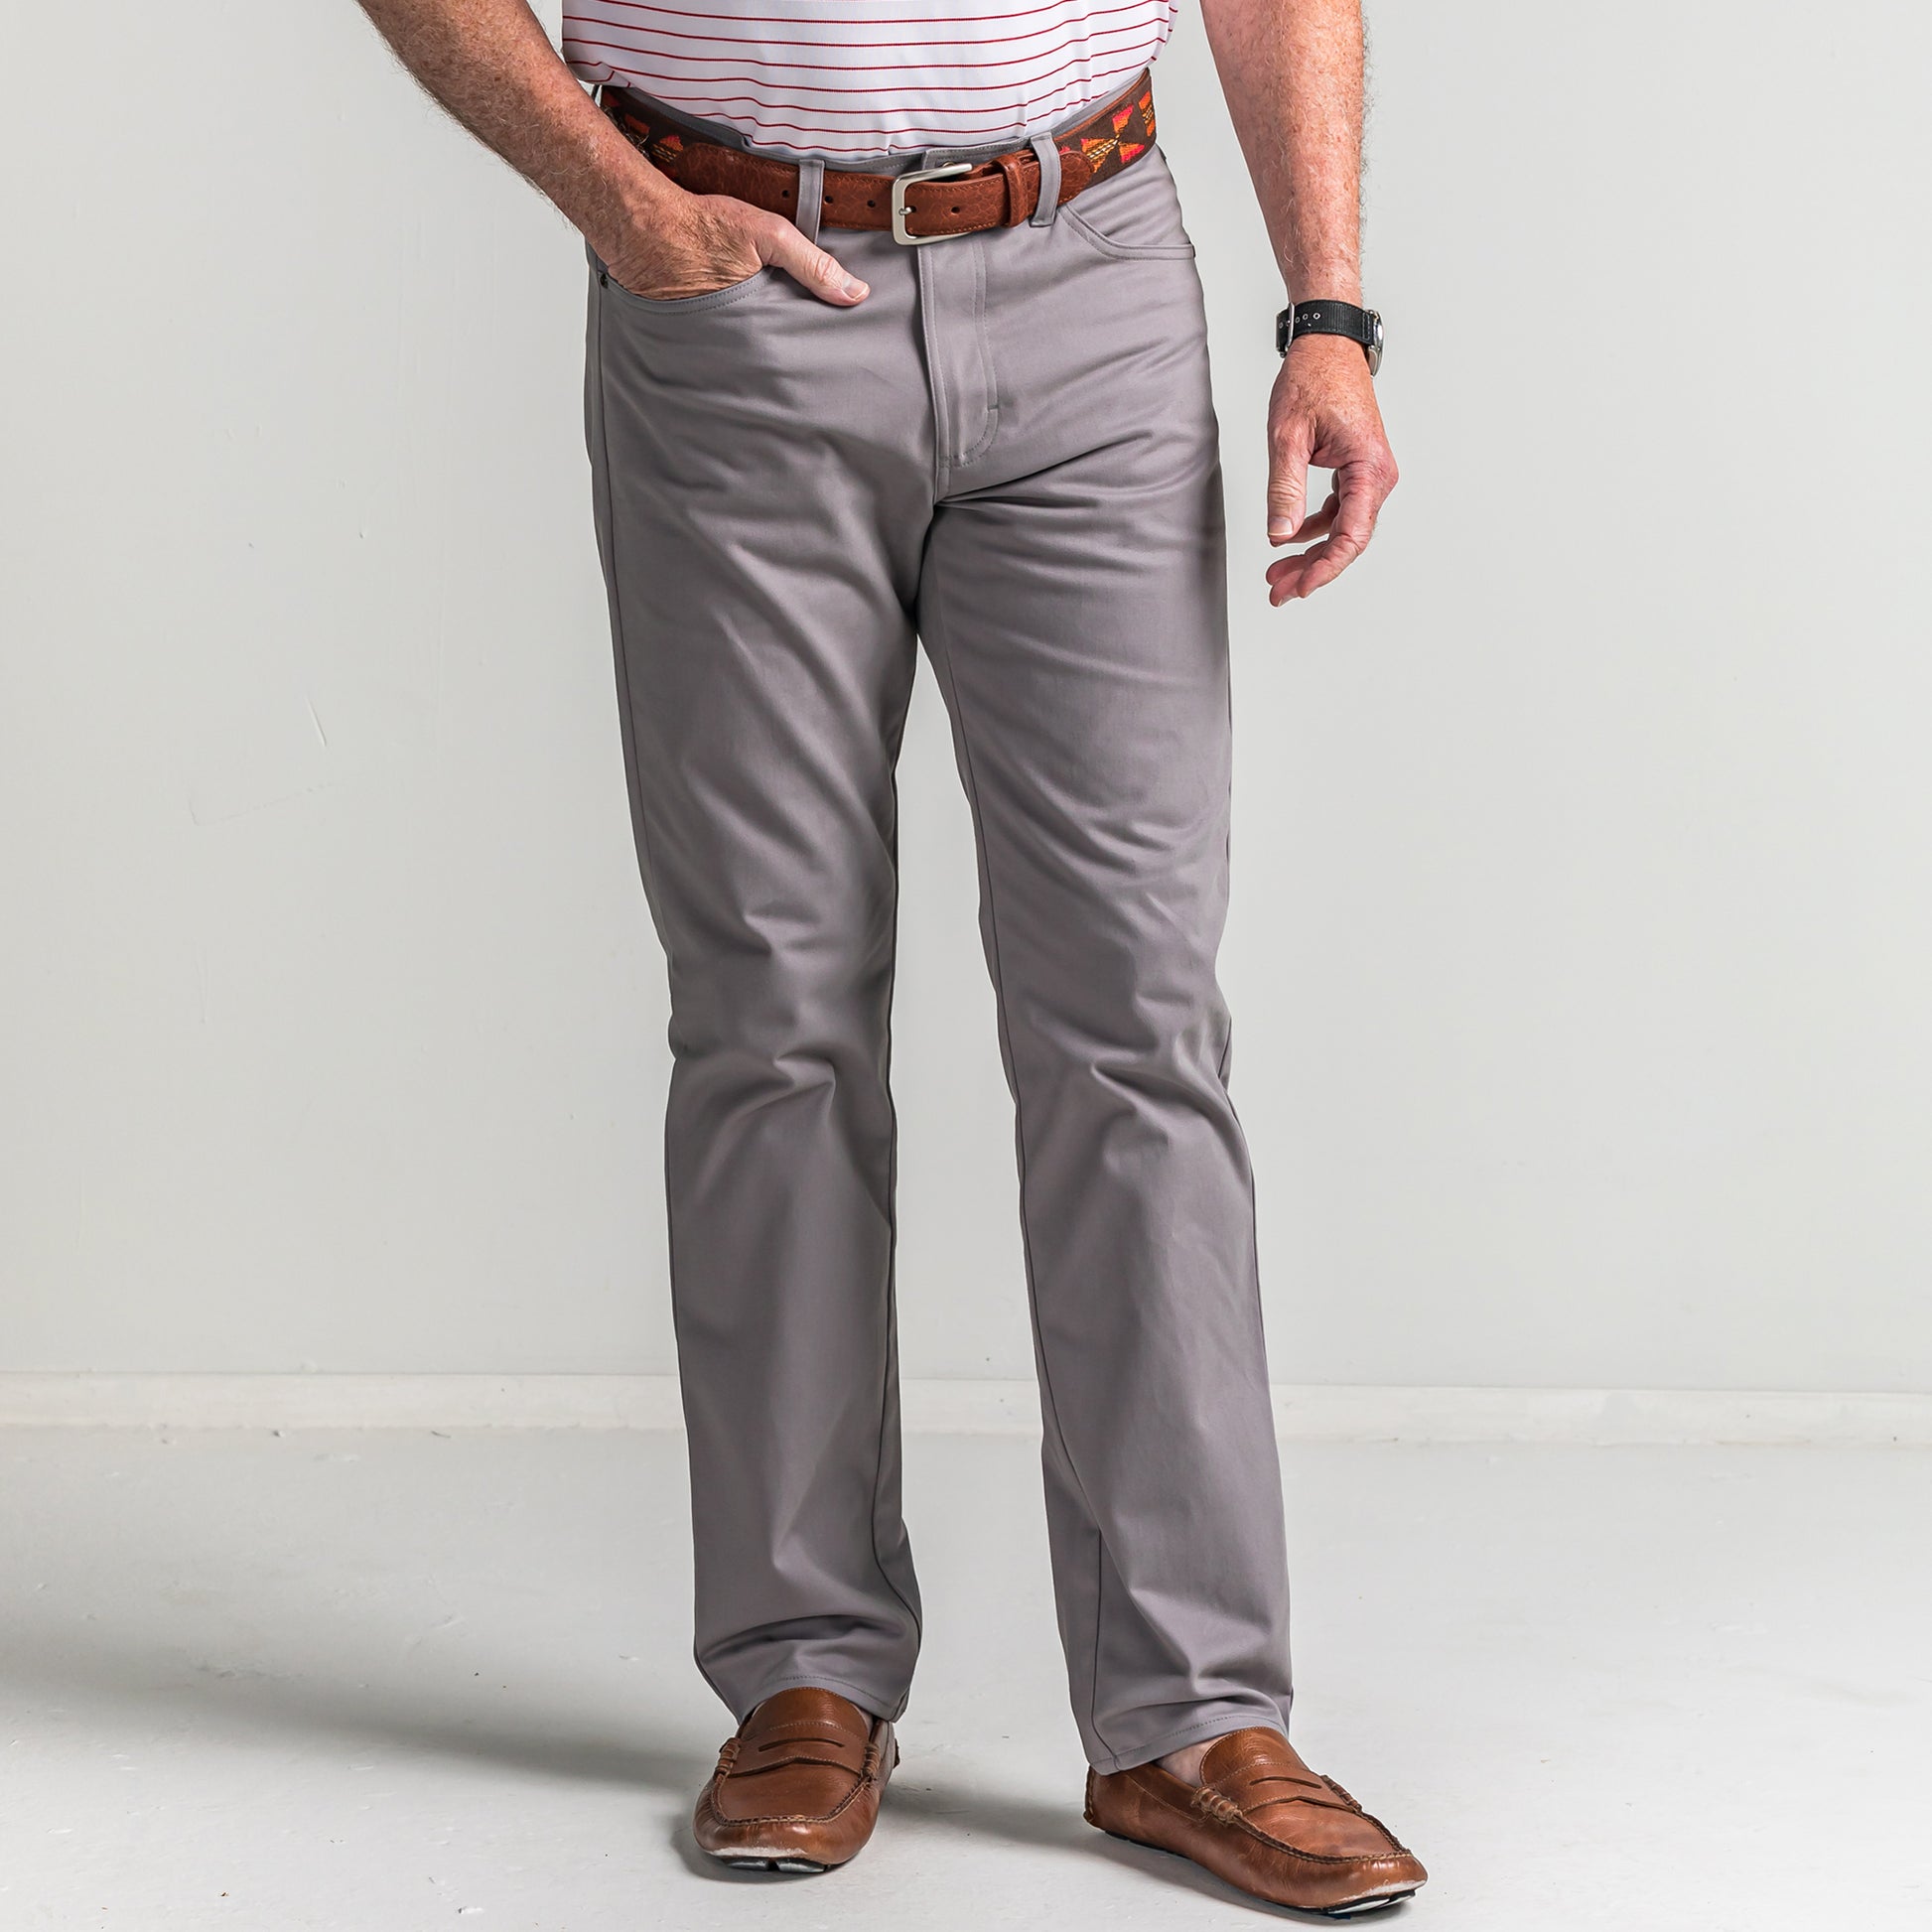 Everyday Comfort 5-Pocket Pant for Tall Men